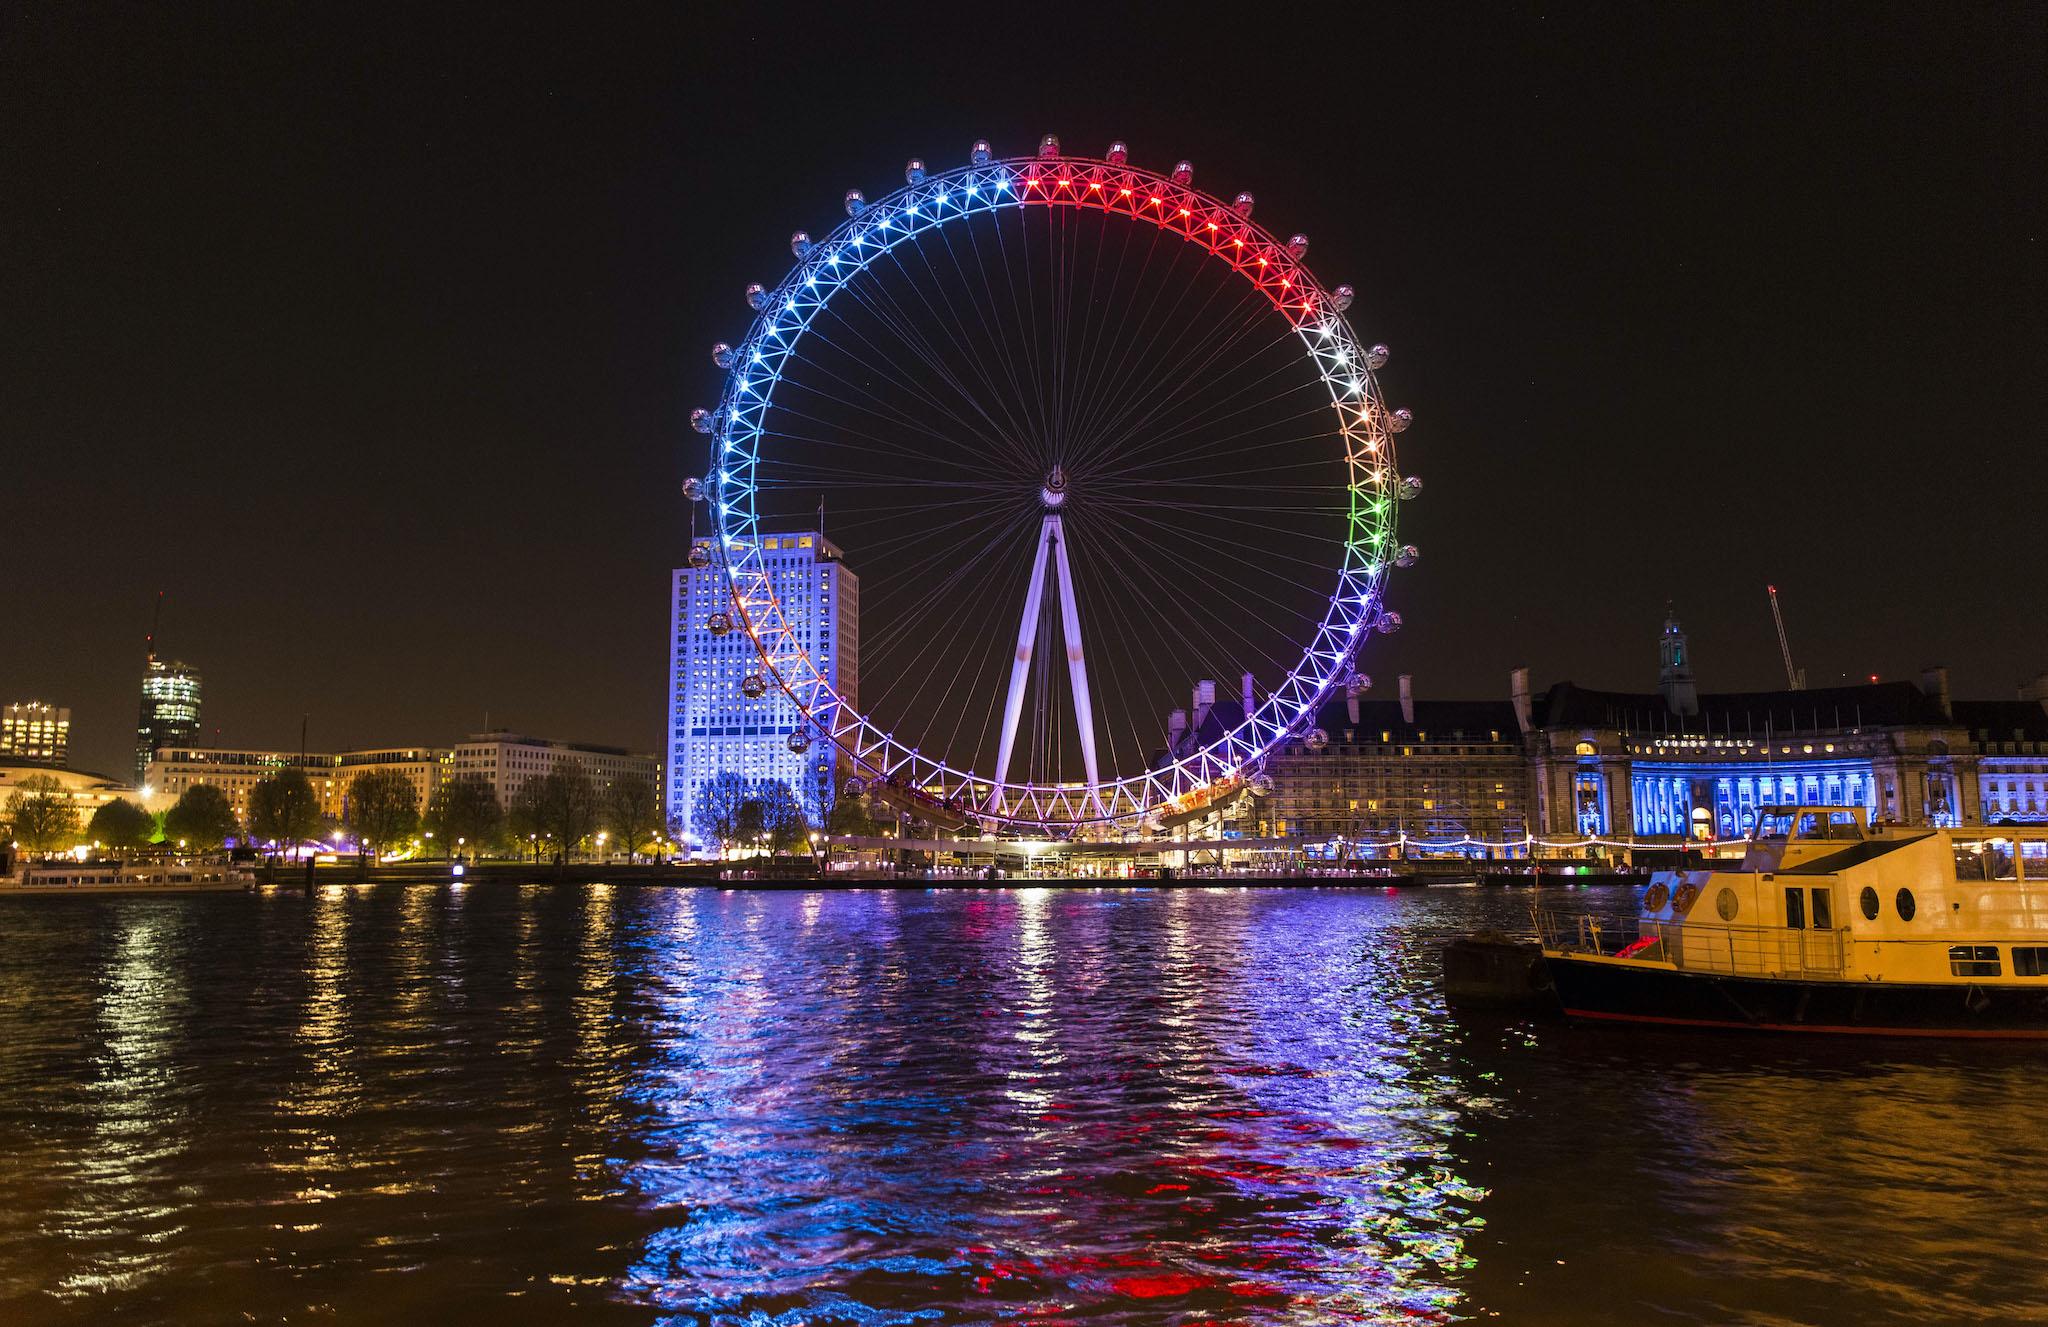 Facebook lights up the London Eye with the colours of political parties to track conversation in the 2015 election